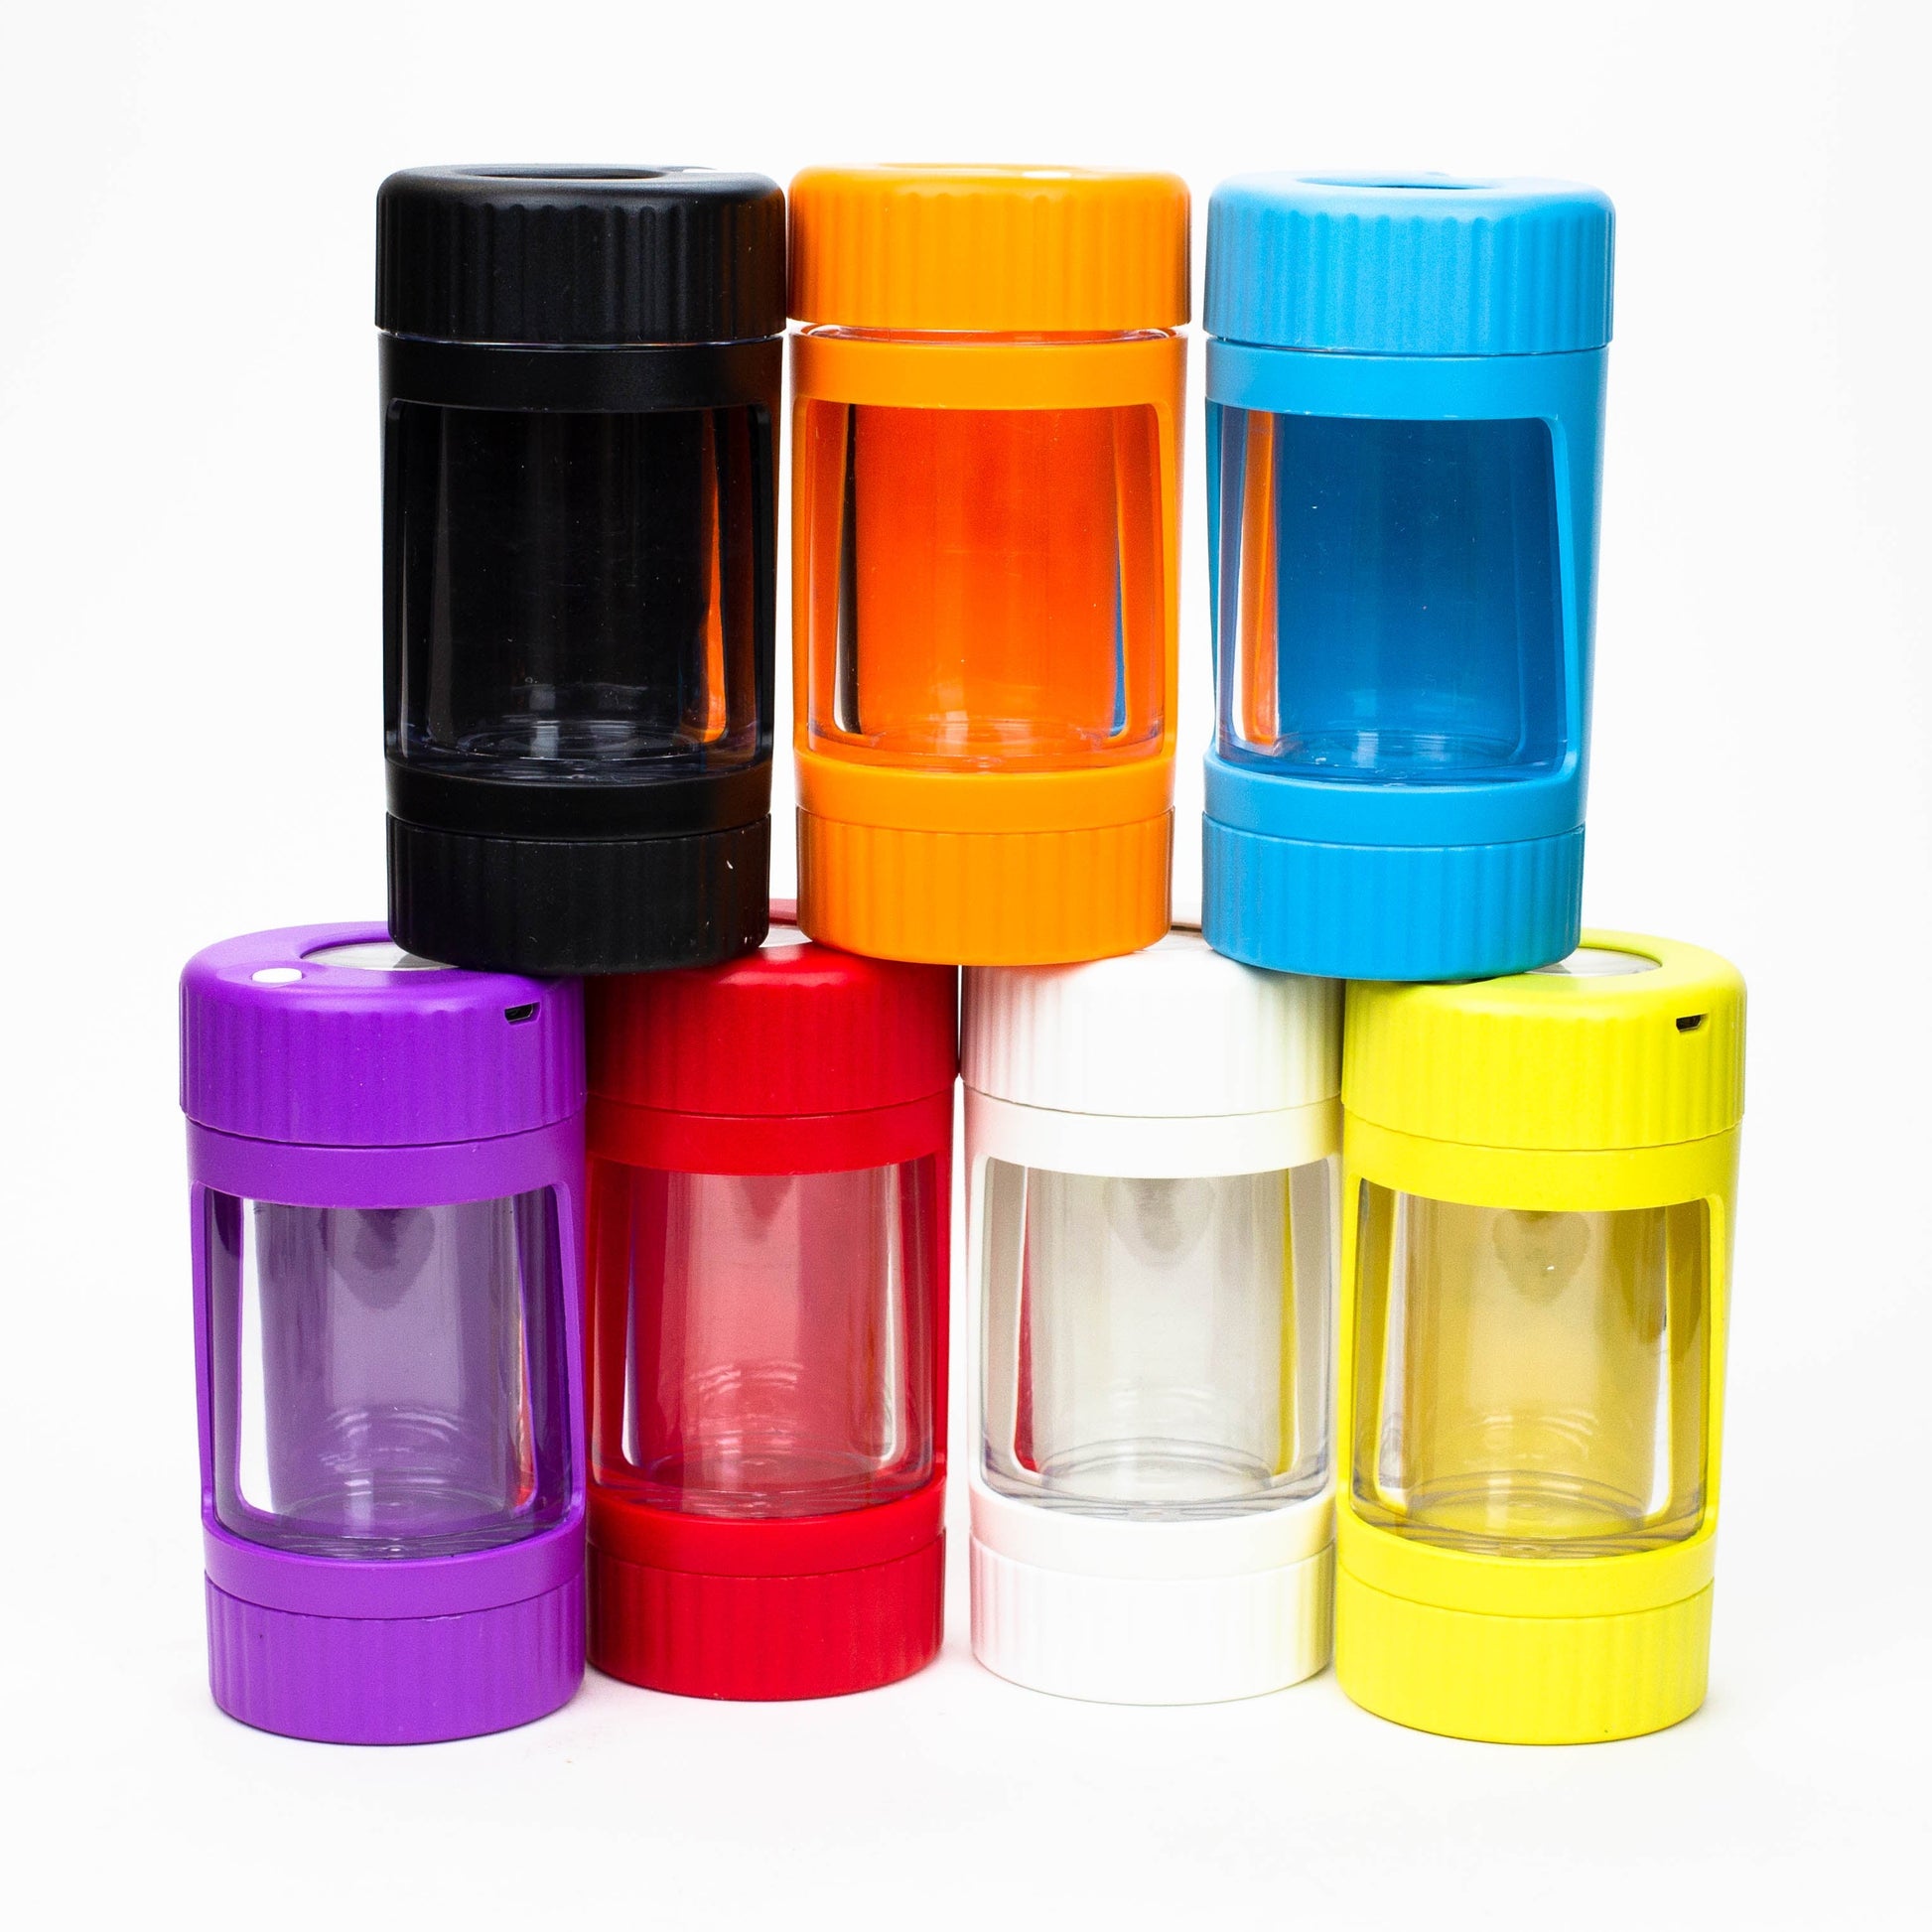 4-in-1 Magnify Led Jar with a grinder and one hitter Smoke Drop 